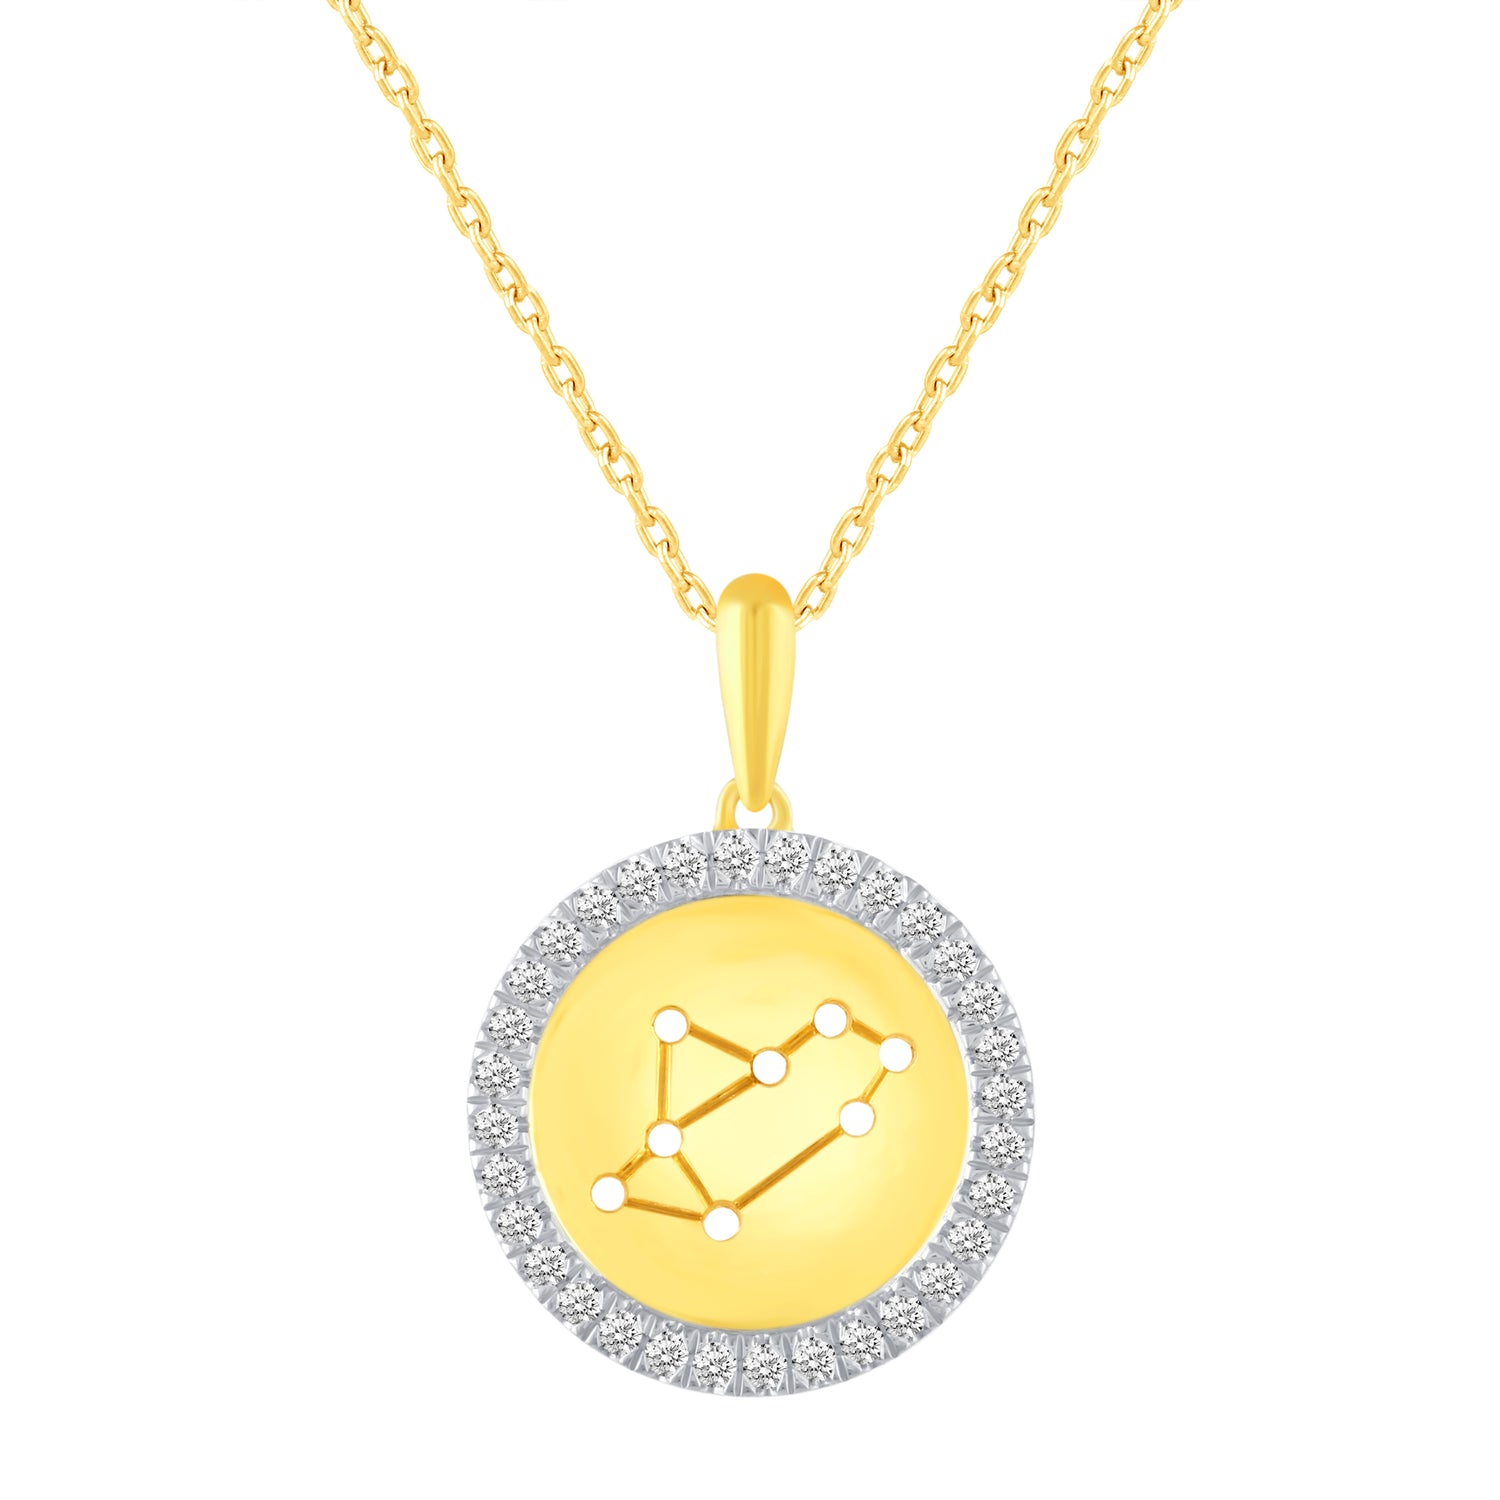 1/20 Cttw Diamond Zodiac Halo Pendant Necklace set in 925 Sterling Silver 14K Yellow Gold Plating